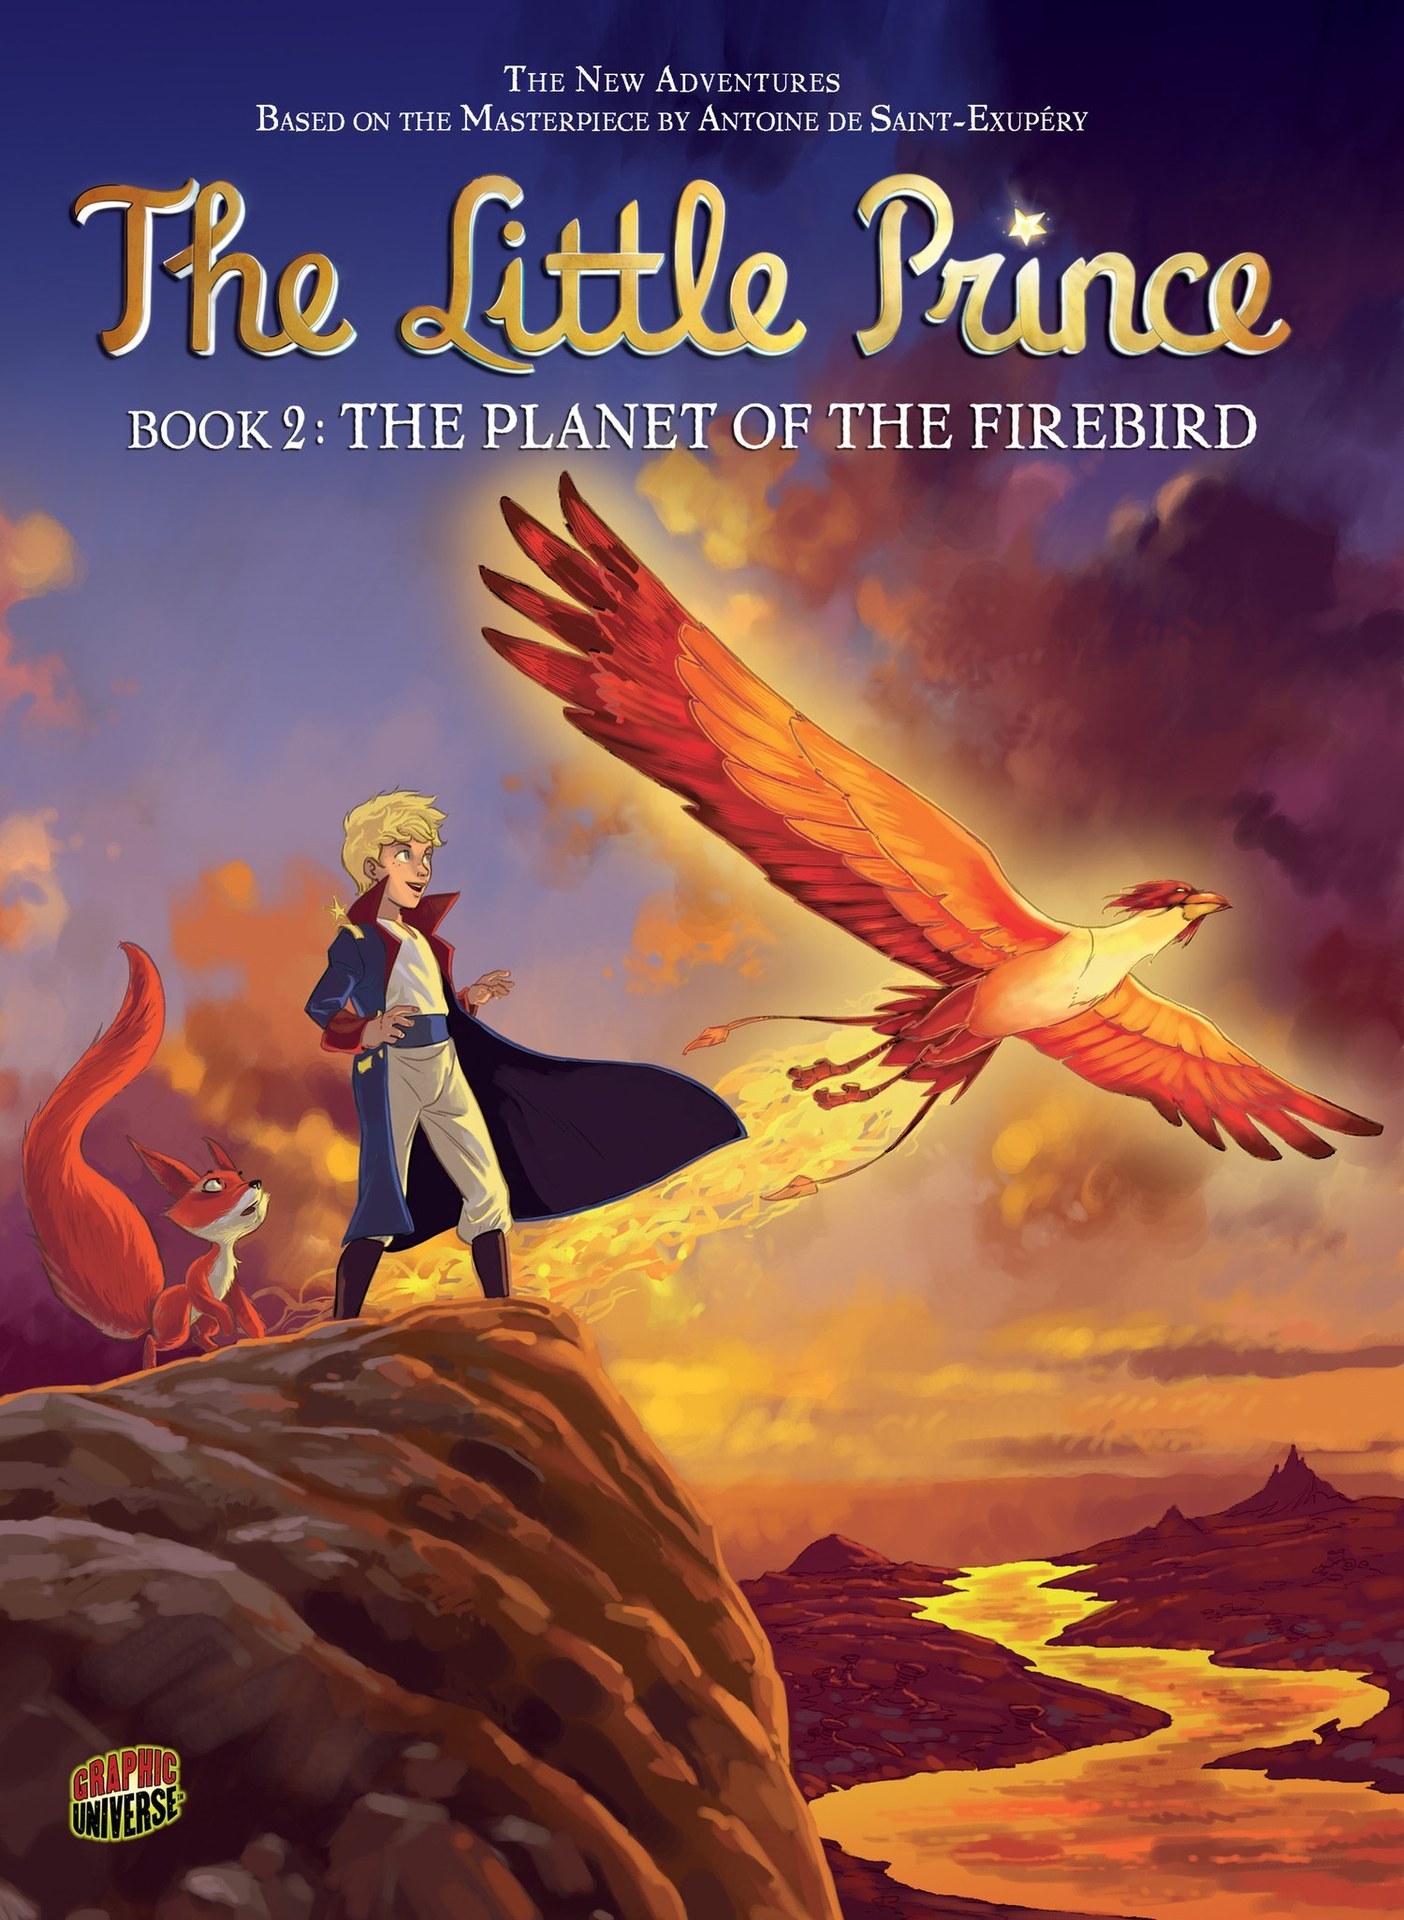 The Little Prince Issue 2 | Read The Little Prince Issue 2 comic online in  high quality. Read Full Comic online for free - Read comics online in high  quality .|viewcomiconline.com